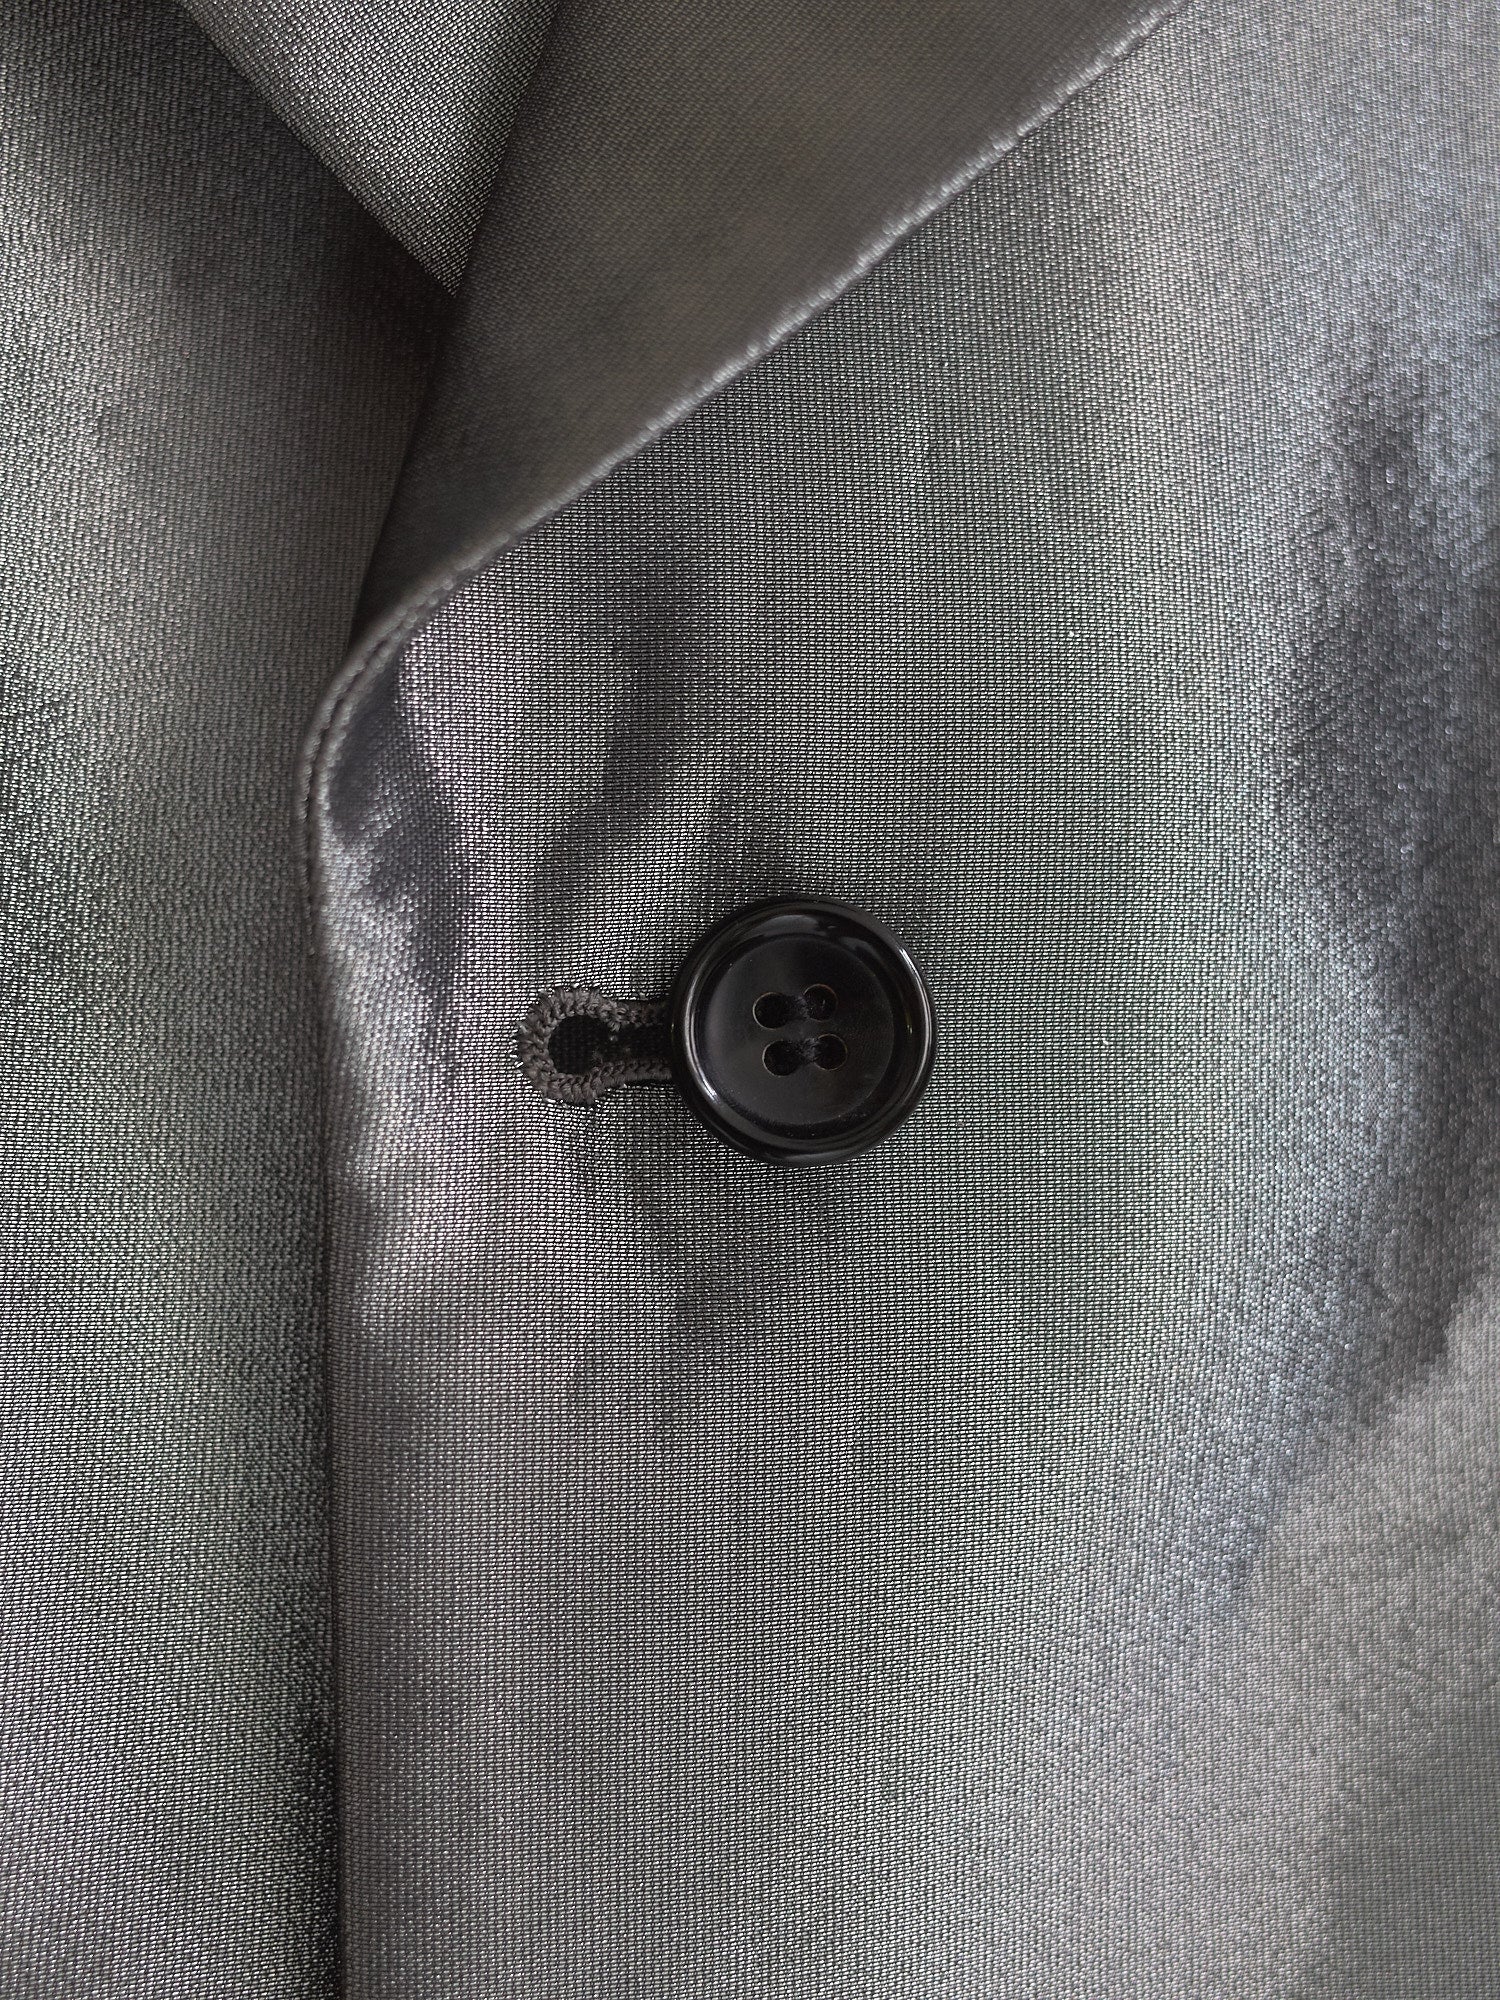 Tricot Comme des Garcons 1995 silver polyester 2 button blazer - womens M S